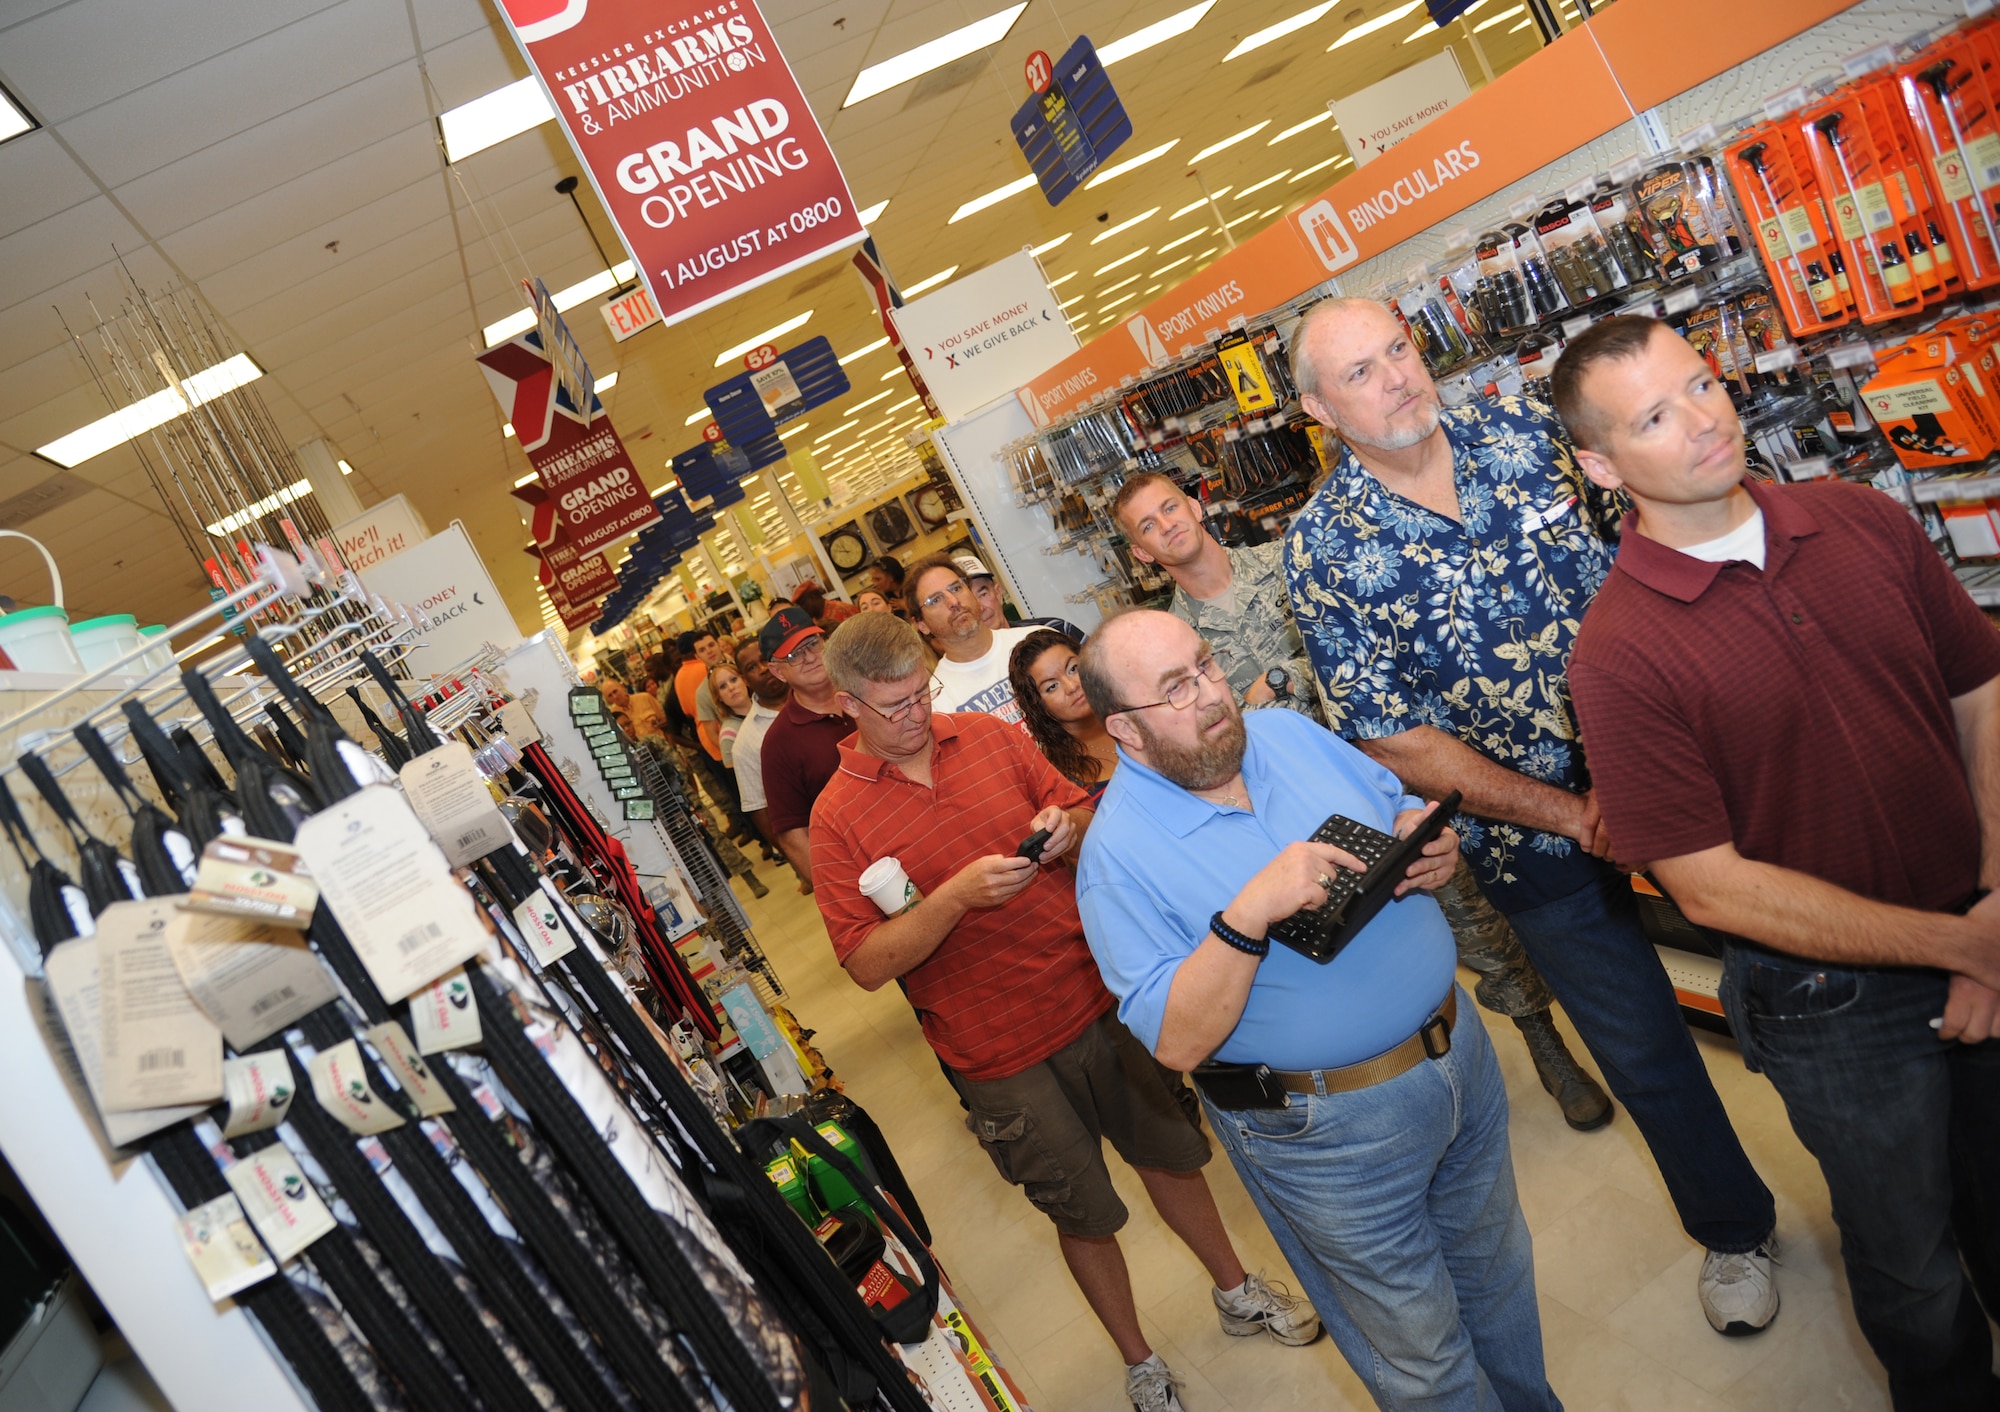 Keesler personnel and retirees stand in line for the firearms and ammunition section grand opening at the base exchange Aug. 1, 2013, at Keesler Air Force Base, Miss.  Acquiring a weapon at the exchange is proceeded by several commander-approved safety measures, and is followed by one of three required actions by the customer to keep the base safe and secure.  (U.S. Air Force photo by Kemberly Groue)